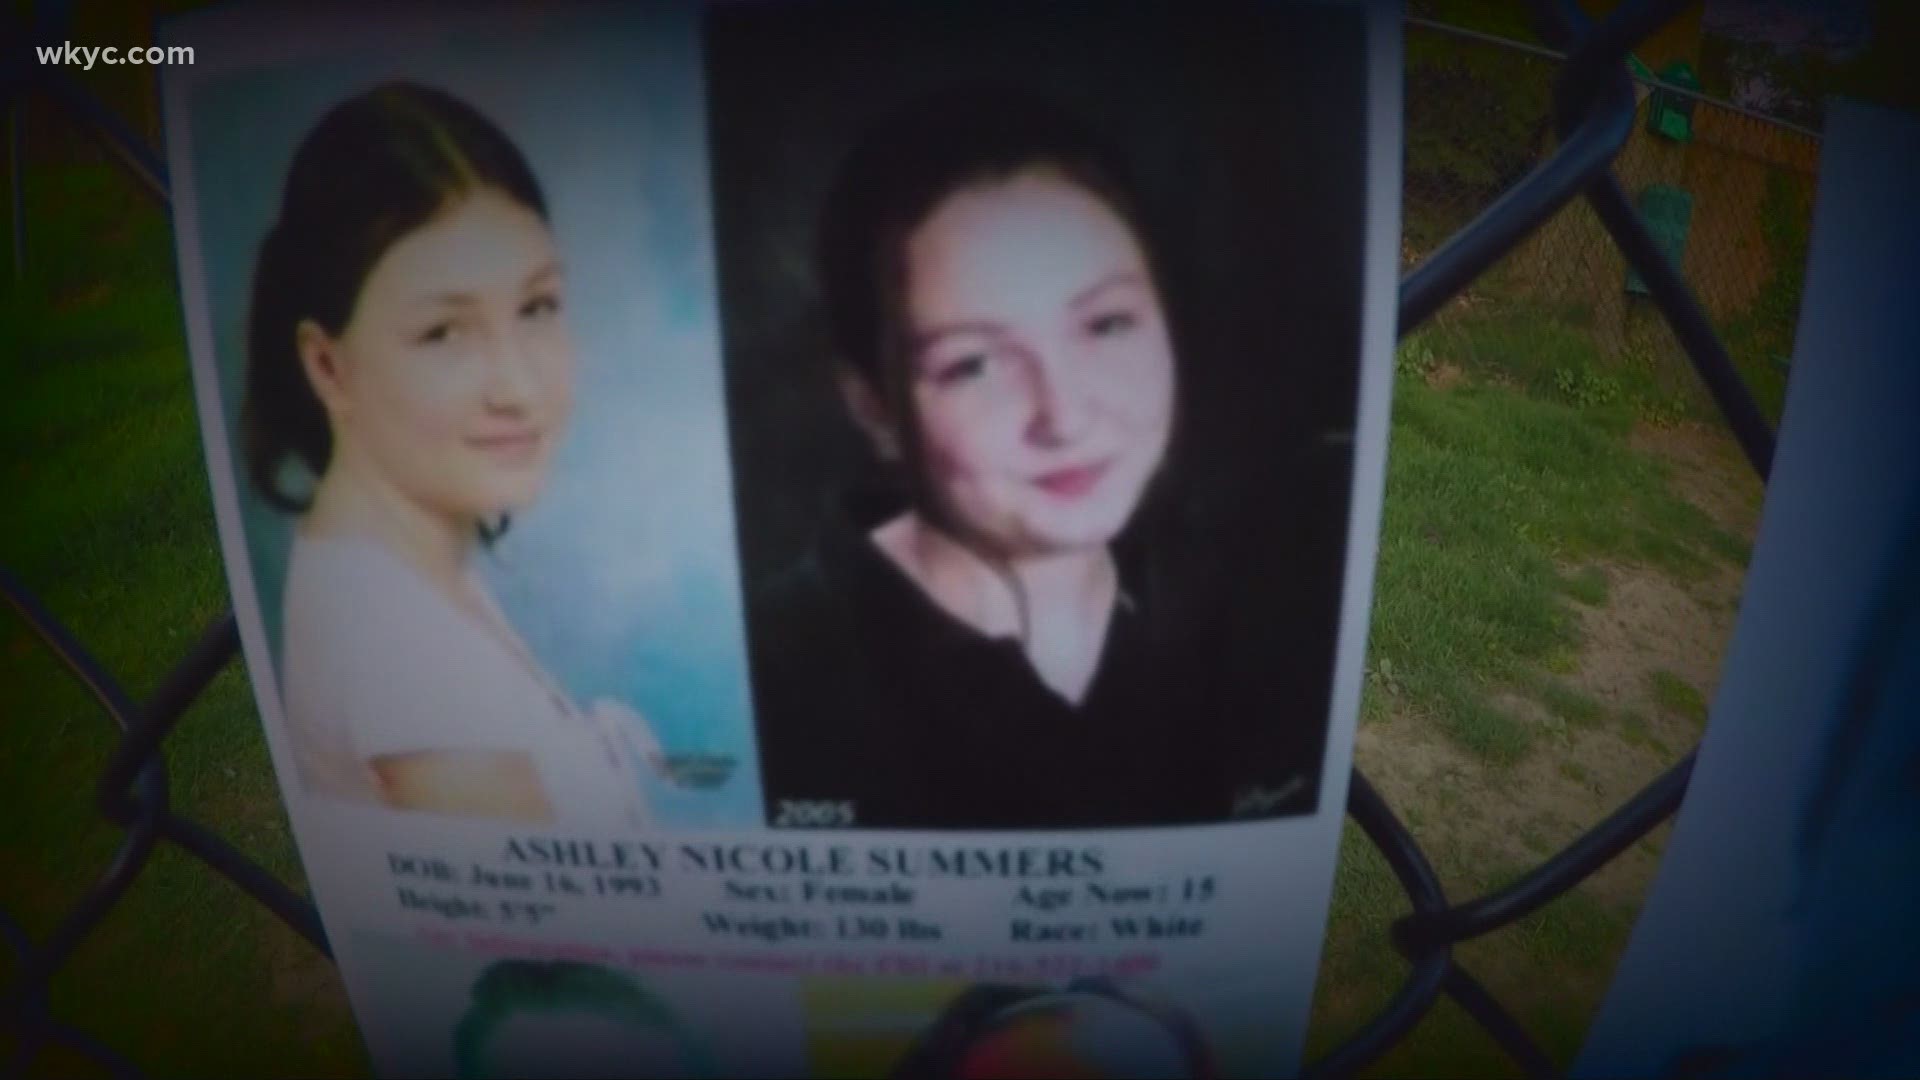 3News Investigates unveils a new ongoing series called 'Someone Knows,' taking a fresh look at unsolved and often forgotten cold cases in Northeast Ohio.